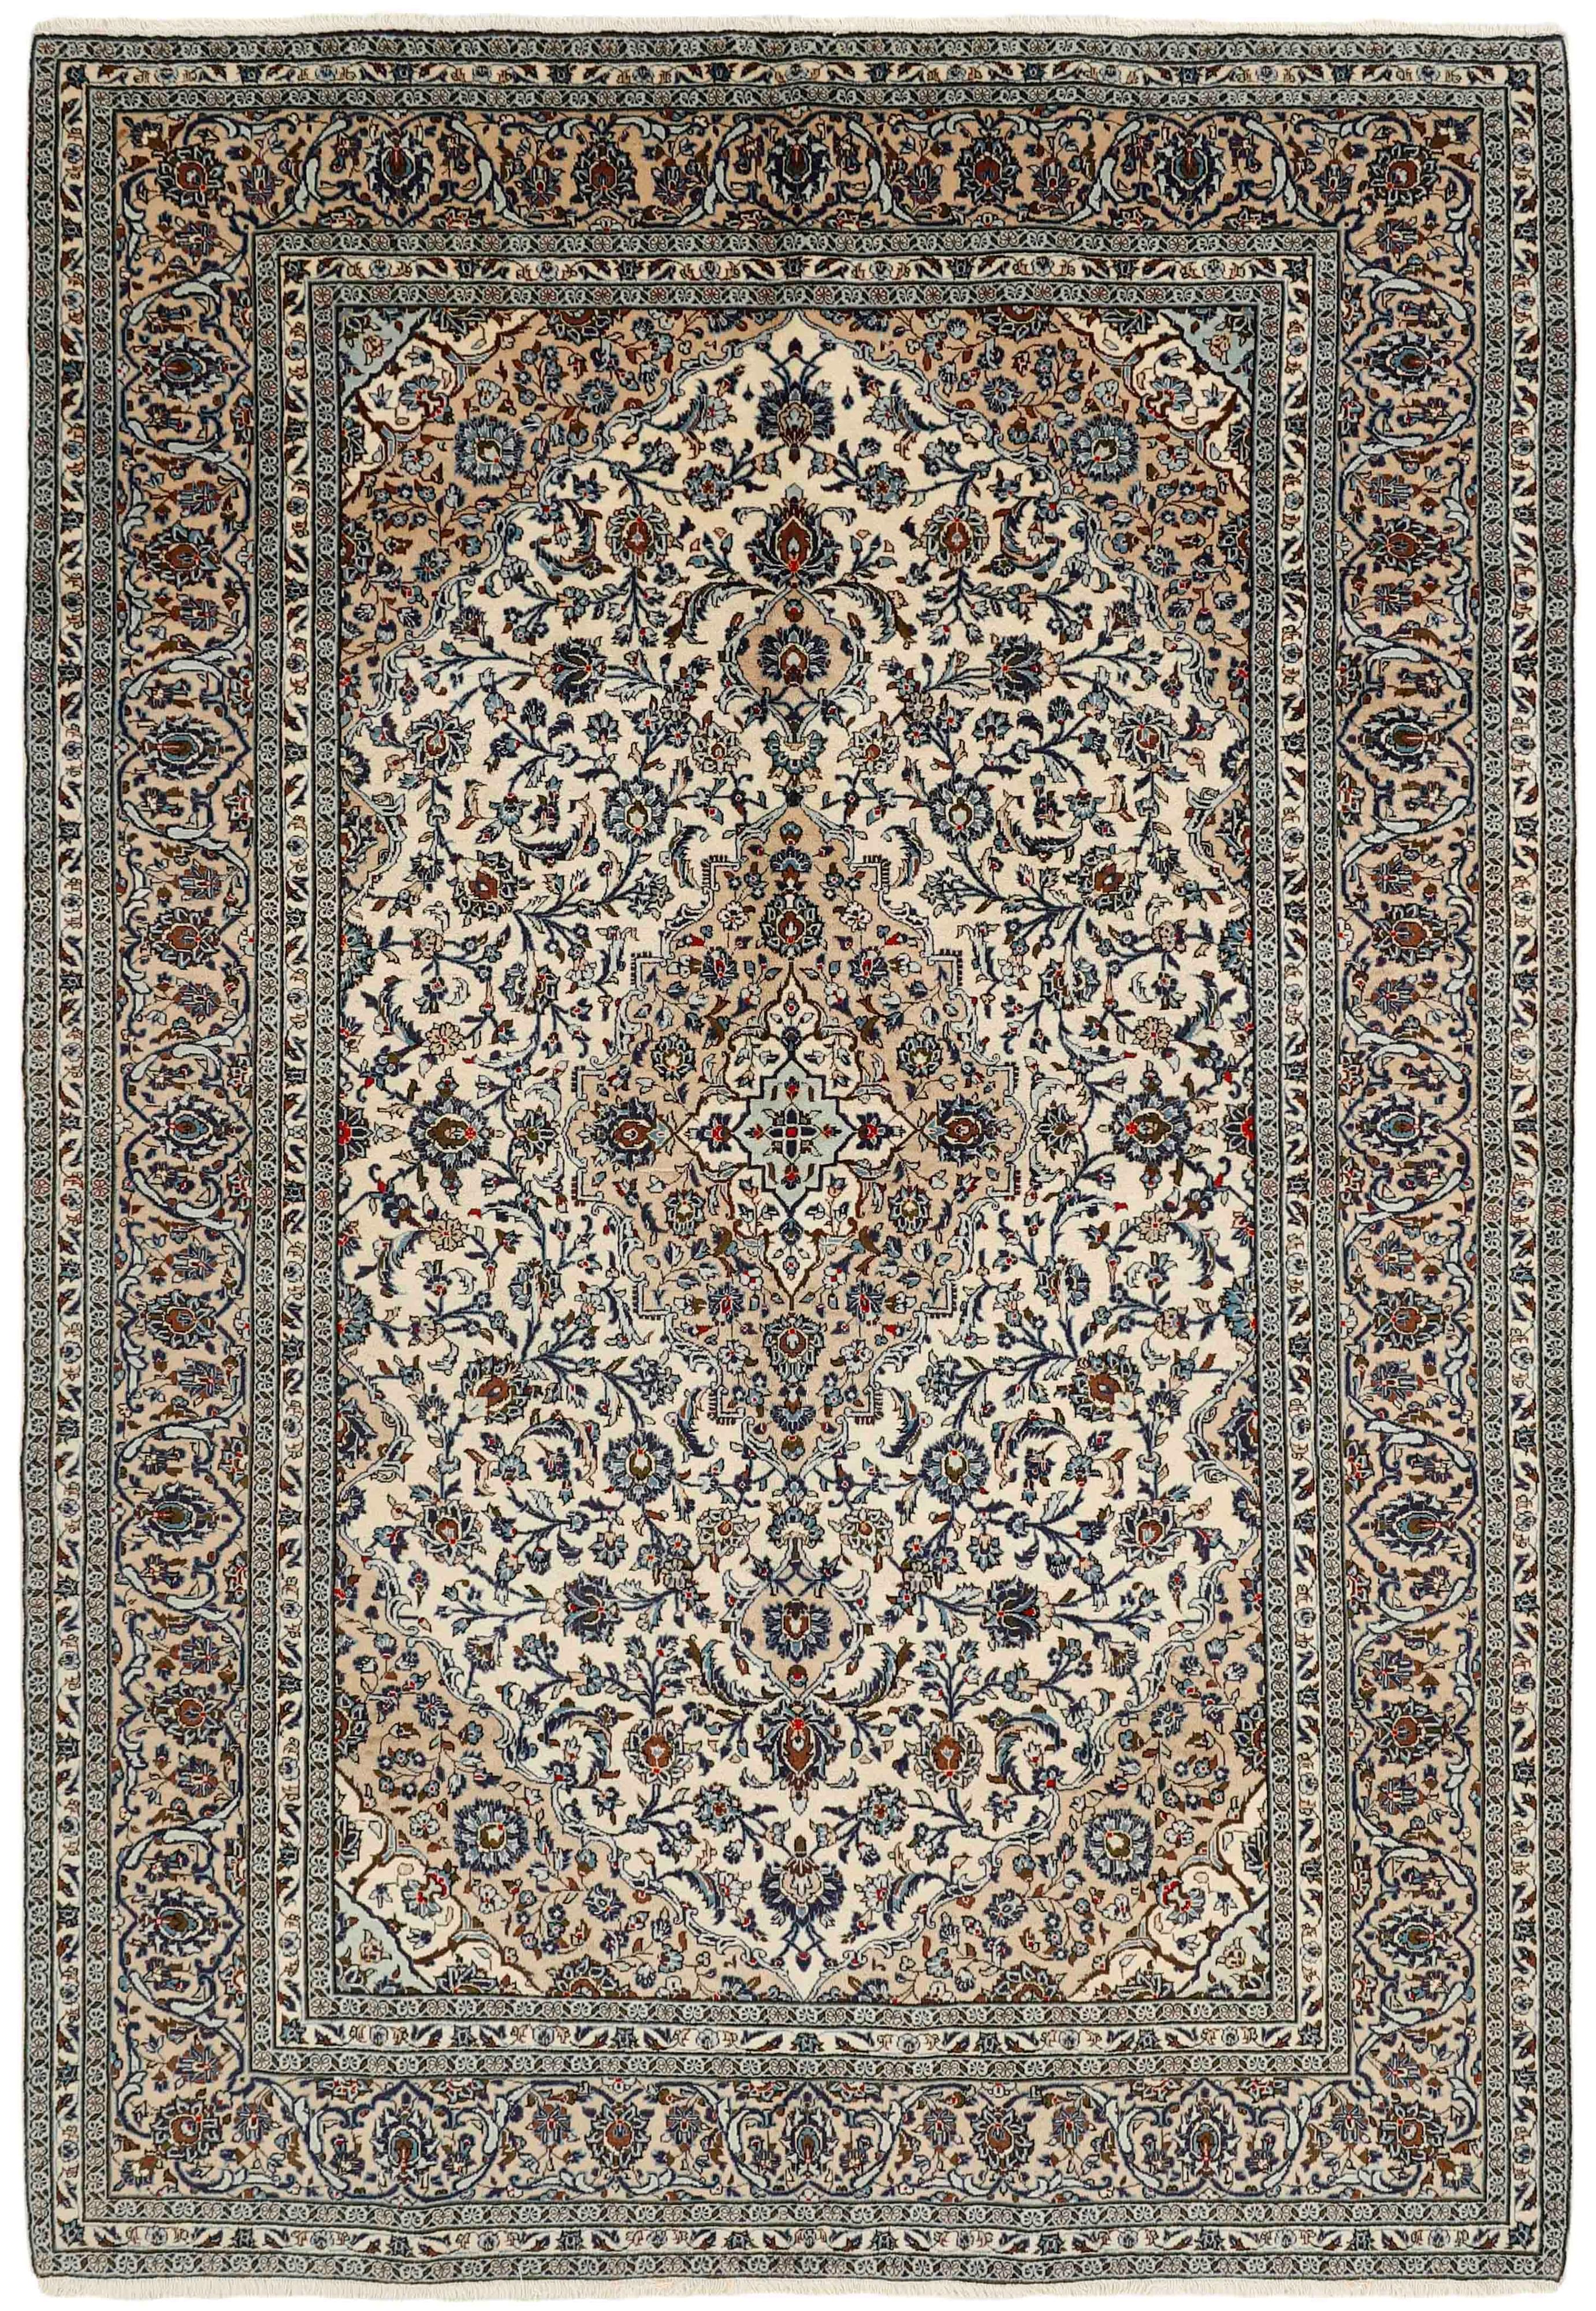 Authentic persian rug with traditional floral design in beige and blue